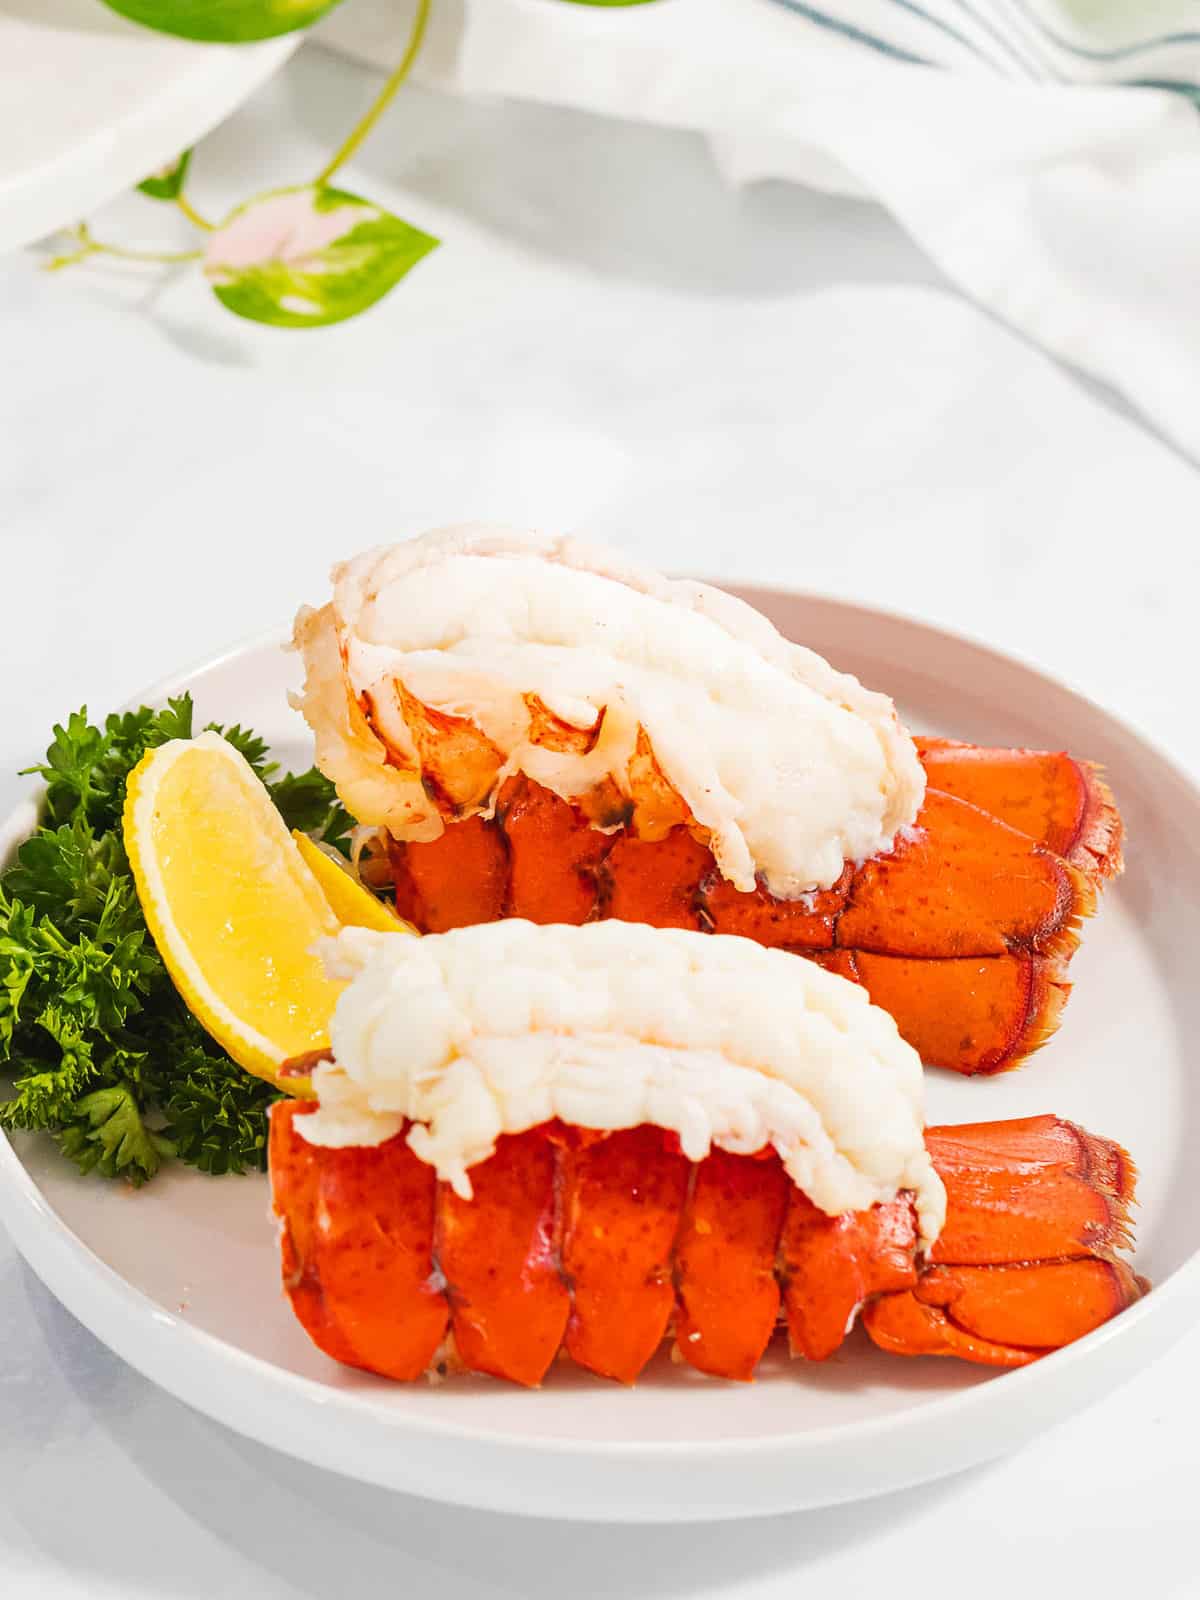 Steamed lobster tails with tender, moist meat and red shells.